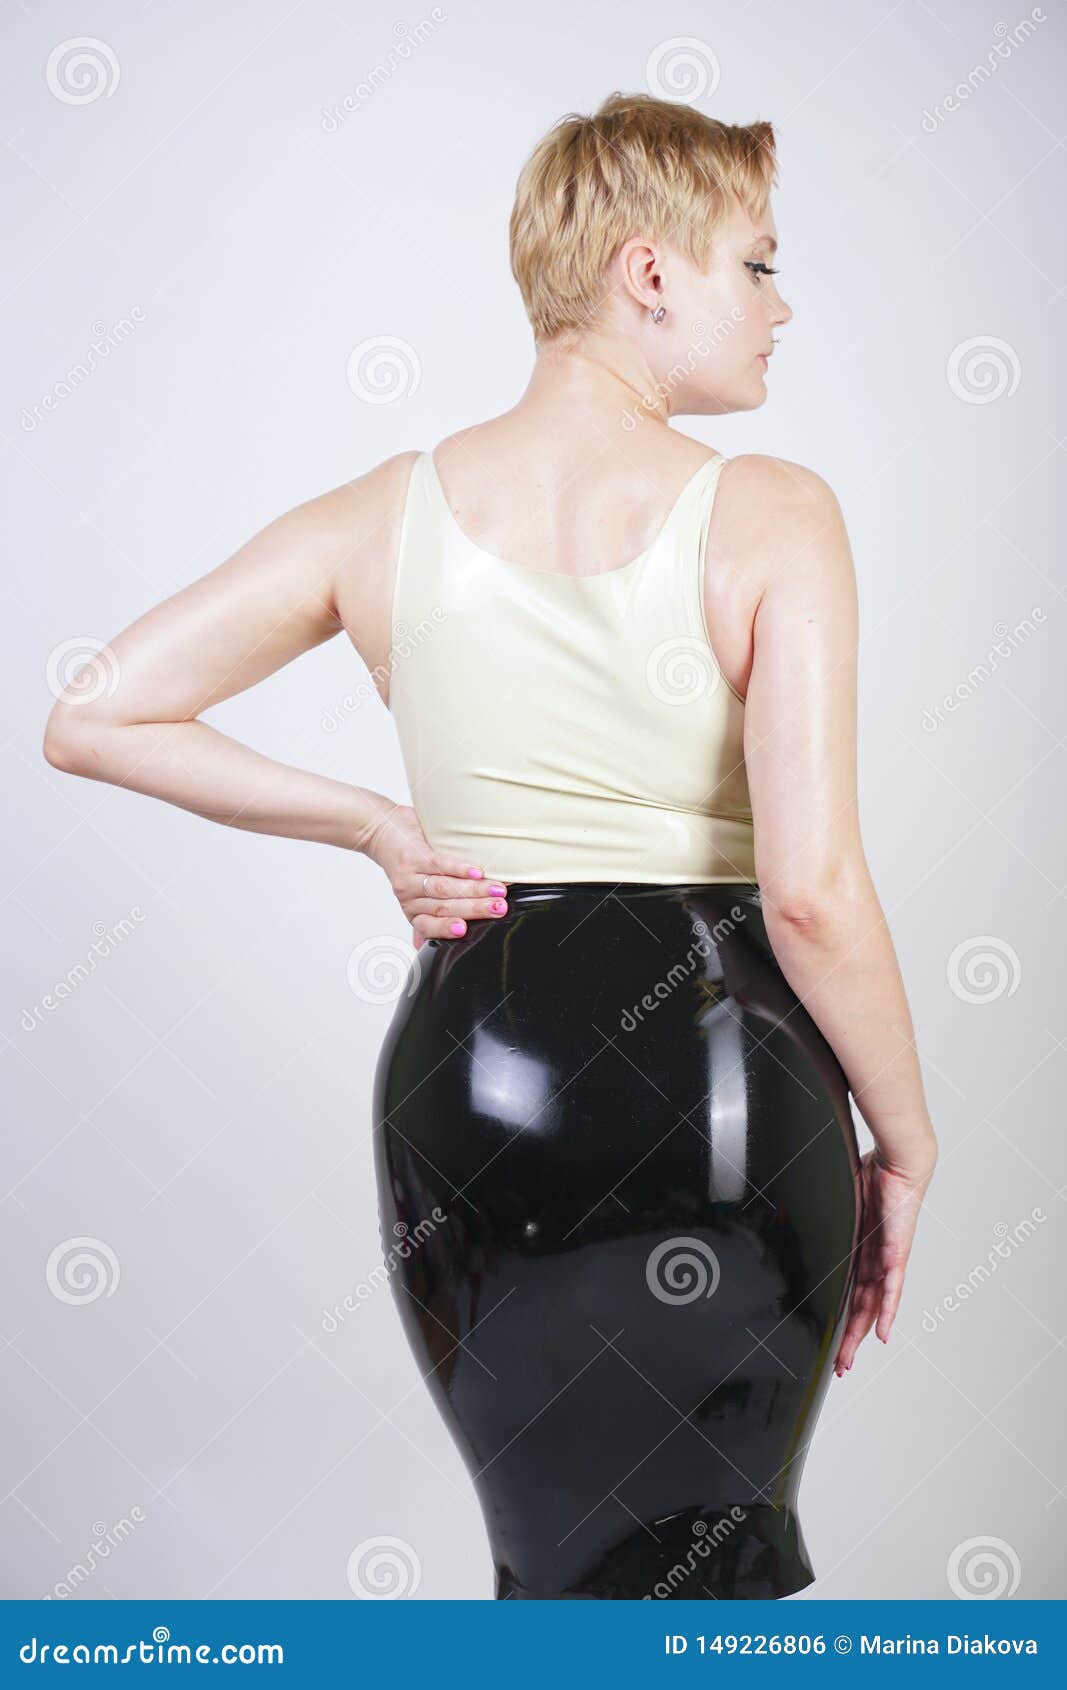 Hot Short Hair Blonde Girl with Curvy Body Wearing Latex Rubber Dress on  White Studio Background Stock Photo - Image of caucasian, heels: 149226806